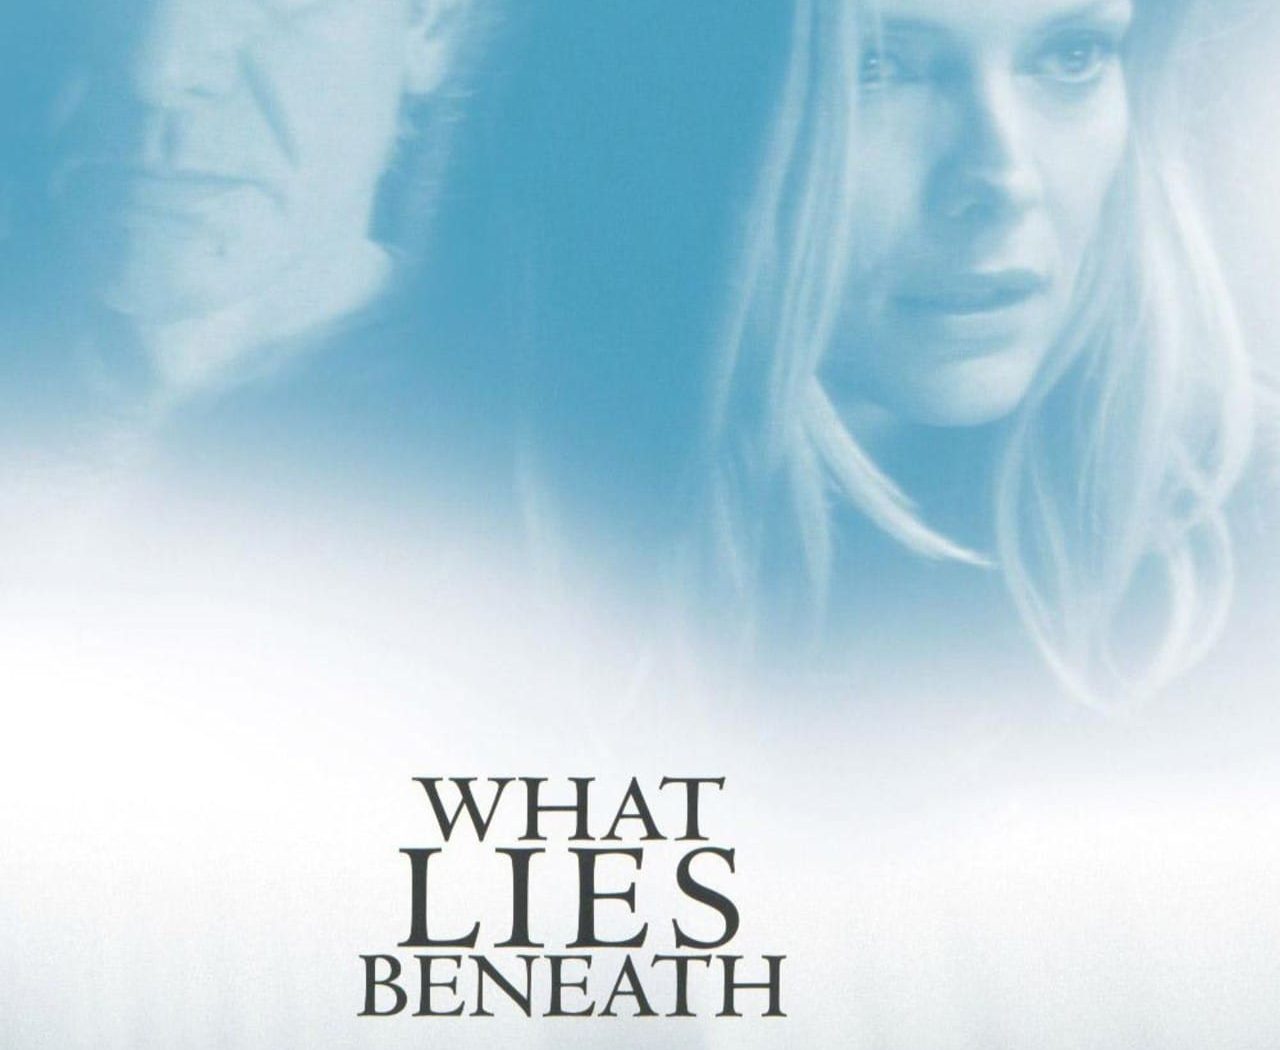 Poster for the movie "What Lies Beneath"